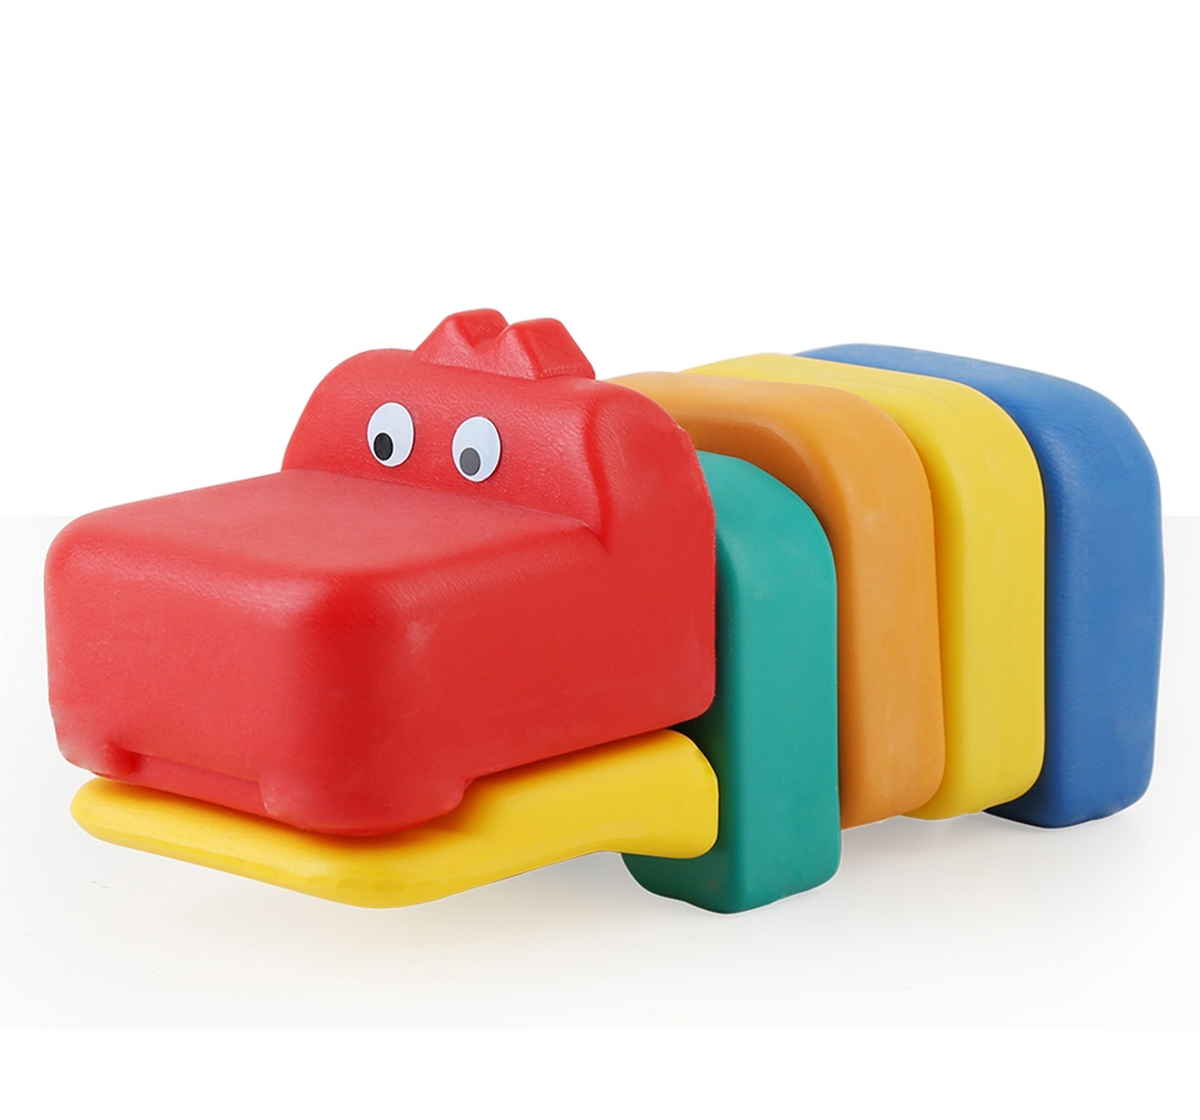 Shooting Star | Shooting star My Pet hippo Plastic toy for kidsToddlers toys Multicolor 1Y+